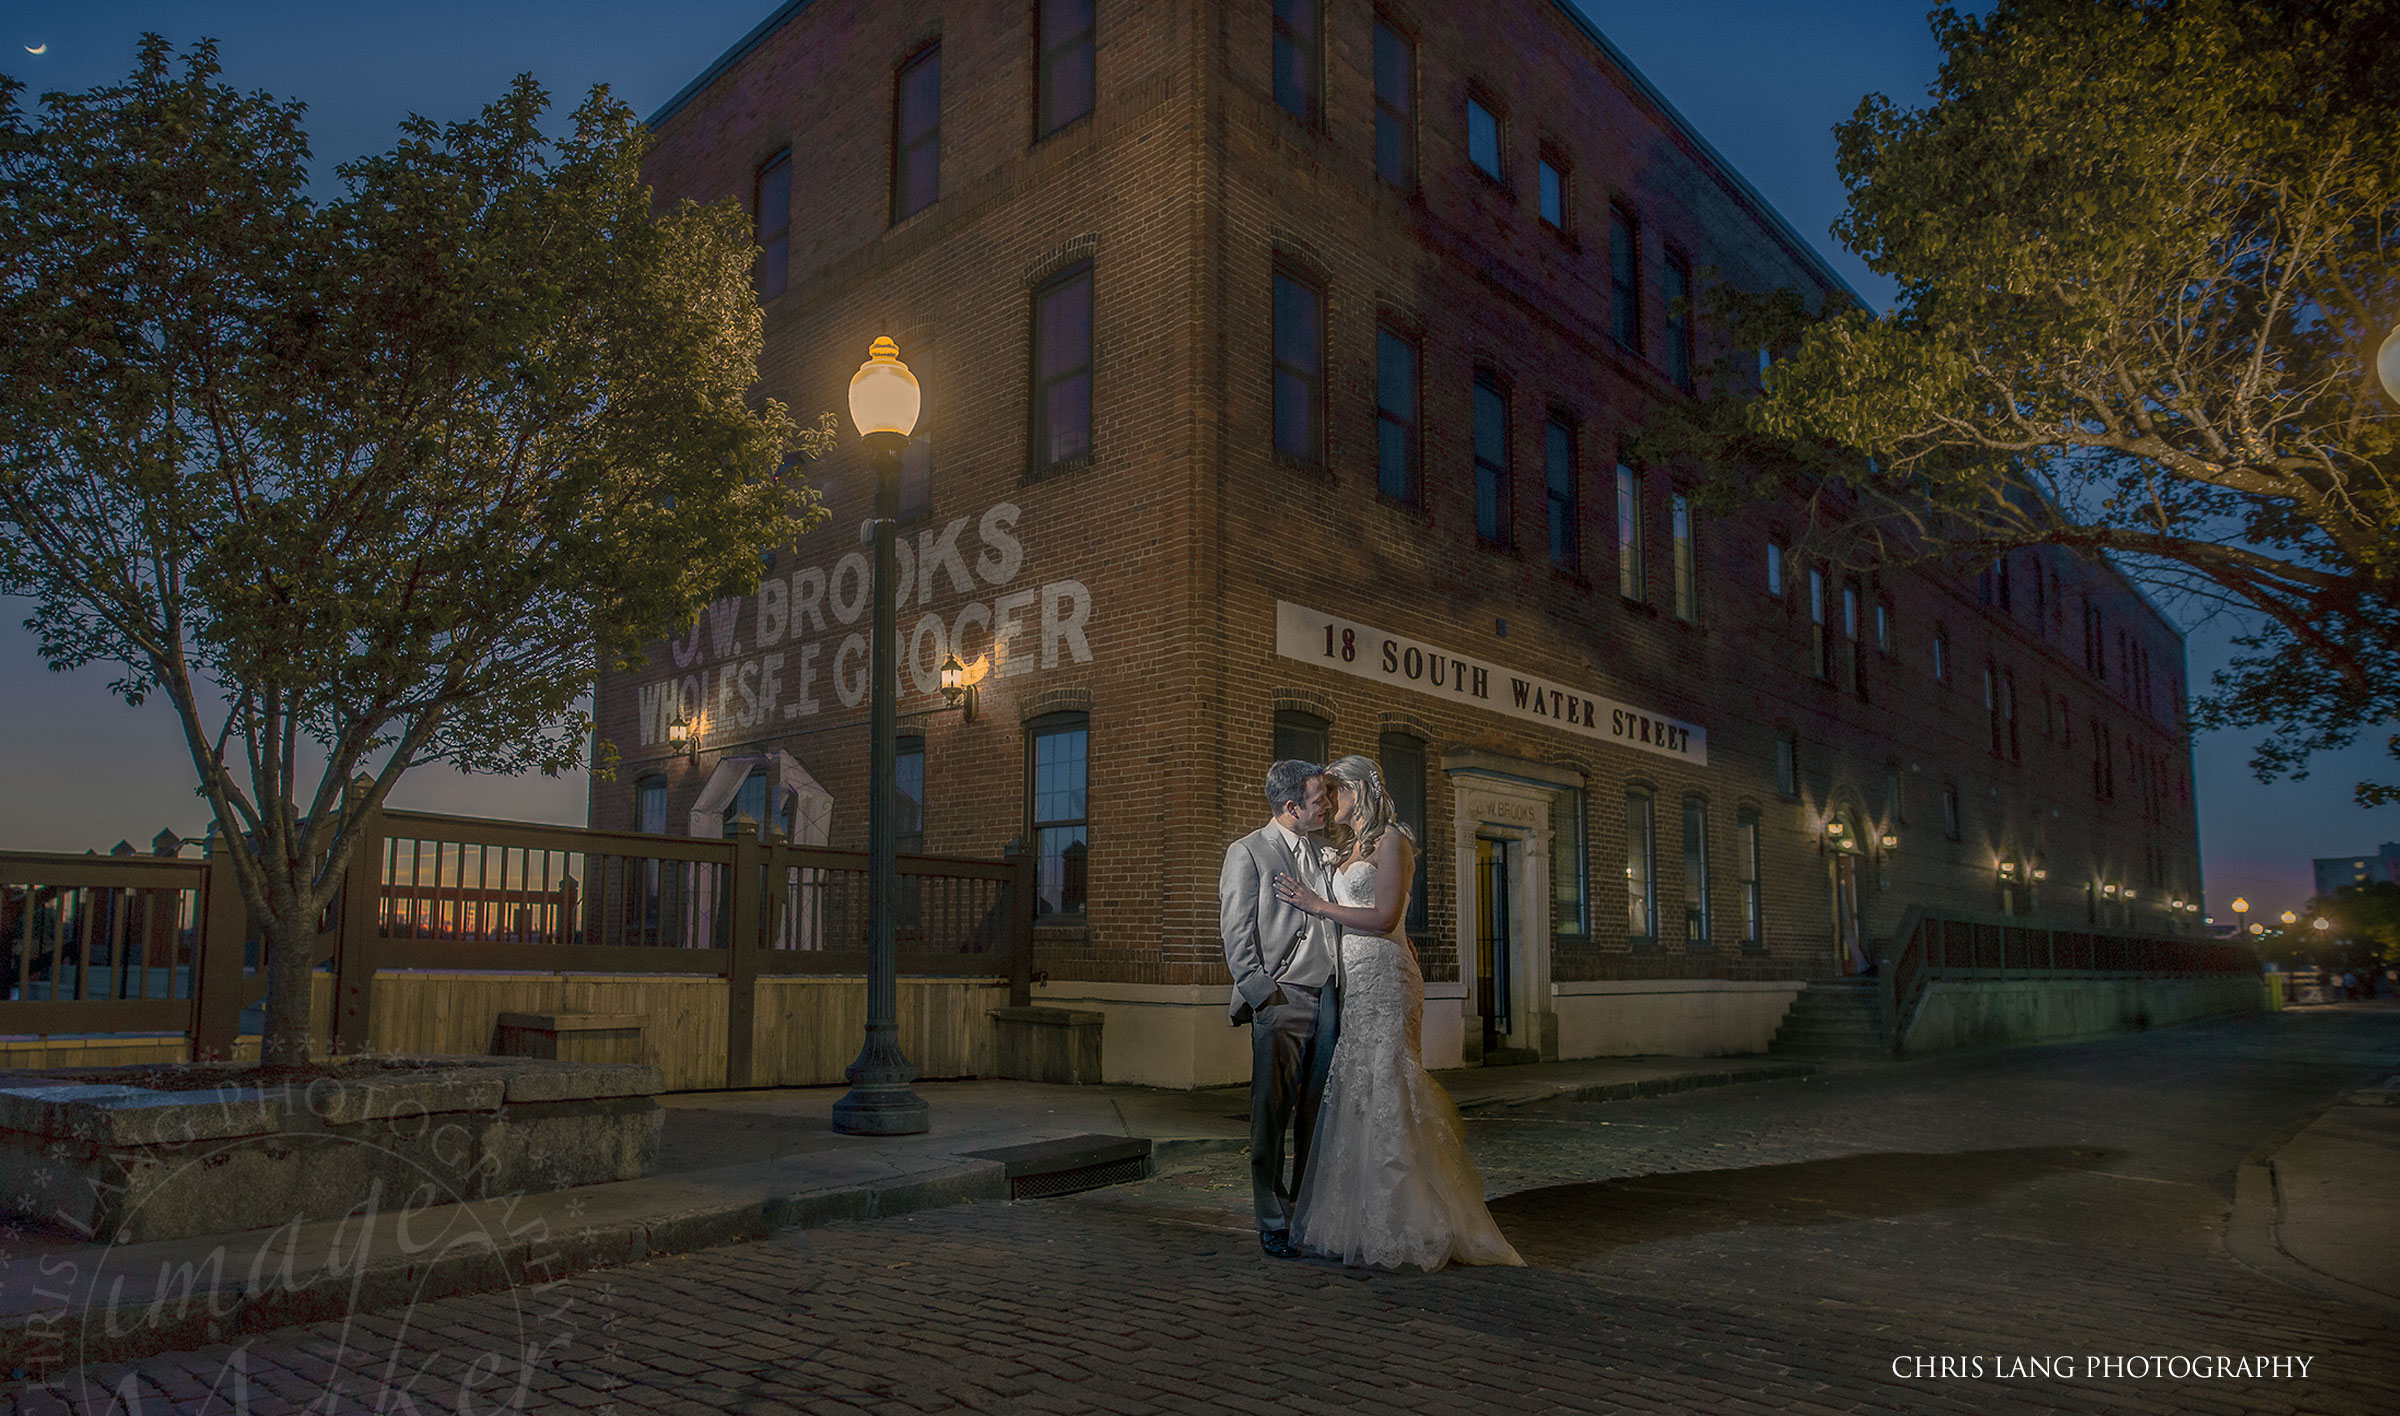 Image of Bride  and groom in front of the River Room on their wedding day - The River Room - Wilmington NC - Wedding Photography - Wedding Venues